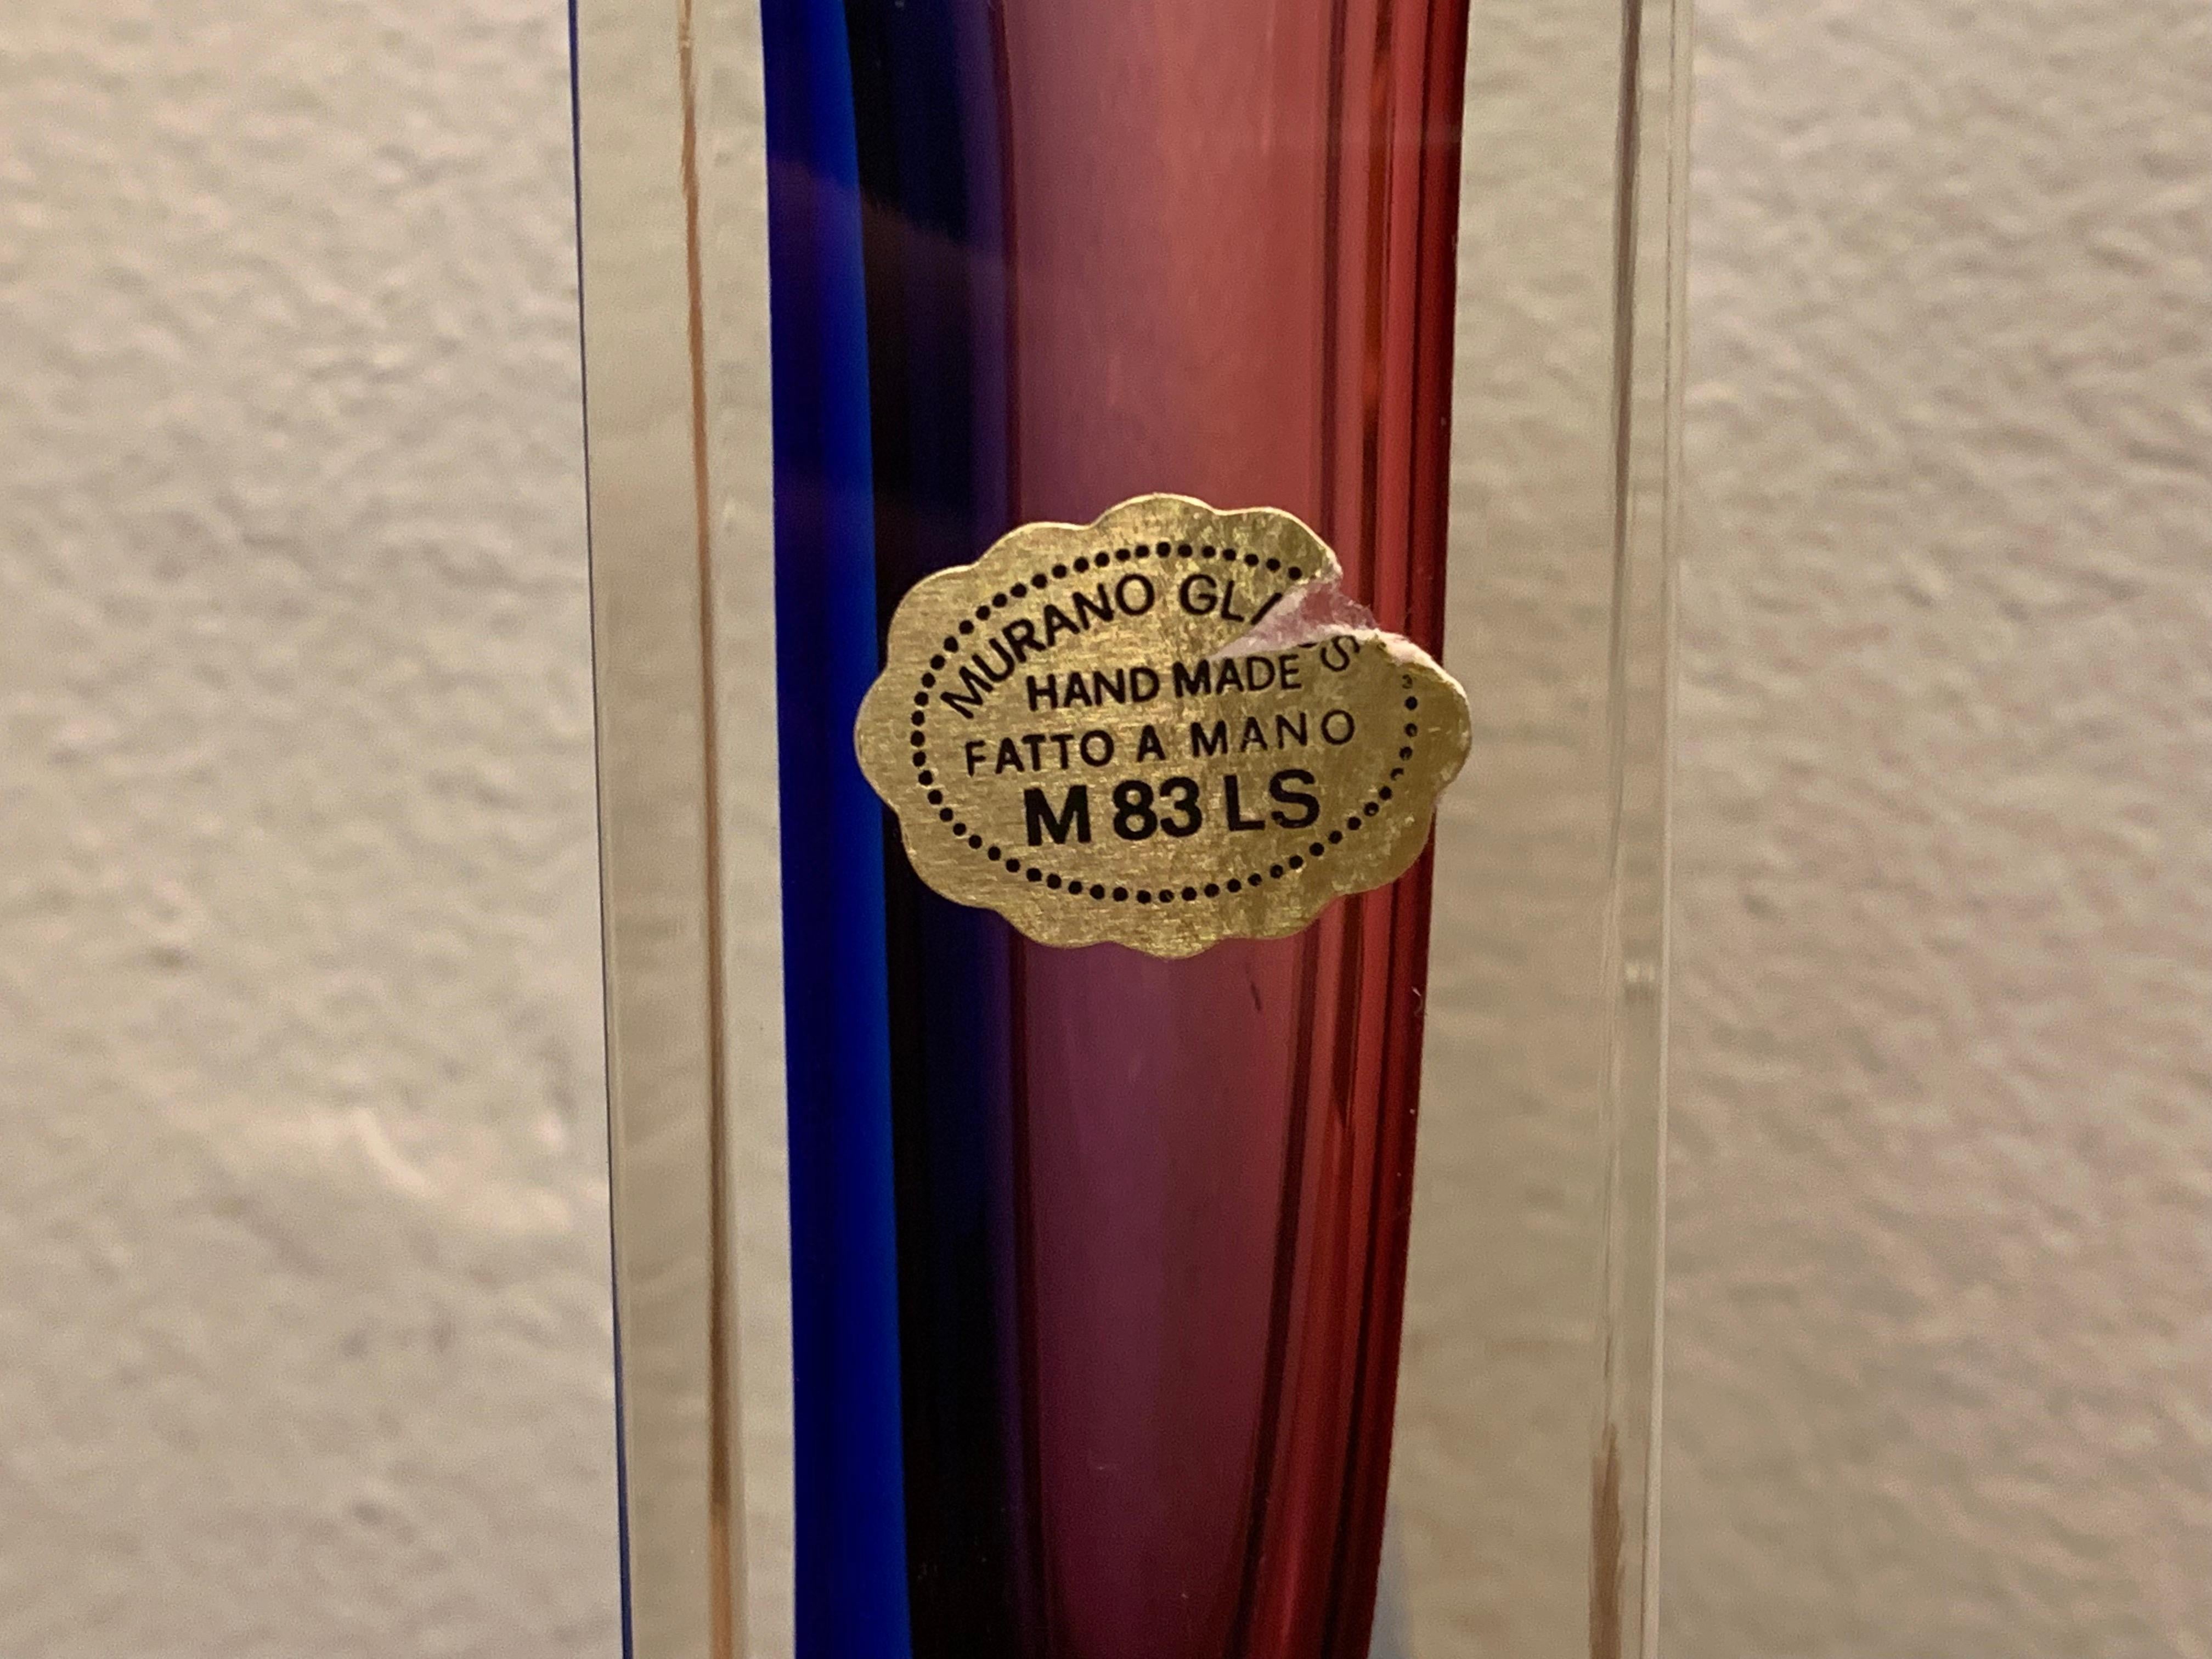 An interesting vintage, Murano, handmade sommerso purple, blue and clear glass vase. The original sticker is visible on one side marked: Murano Glass, Hand Made, Fatto A Mano, M 83 LS. A beautiful decorative piece perfect for a glass display case or